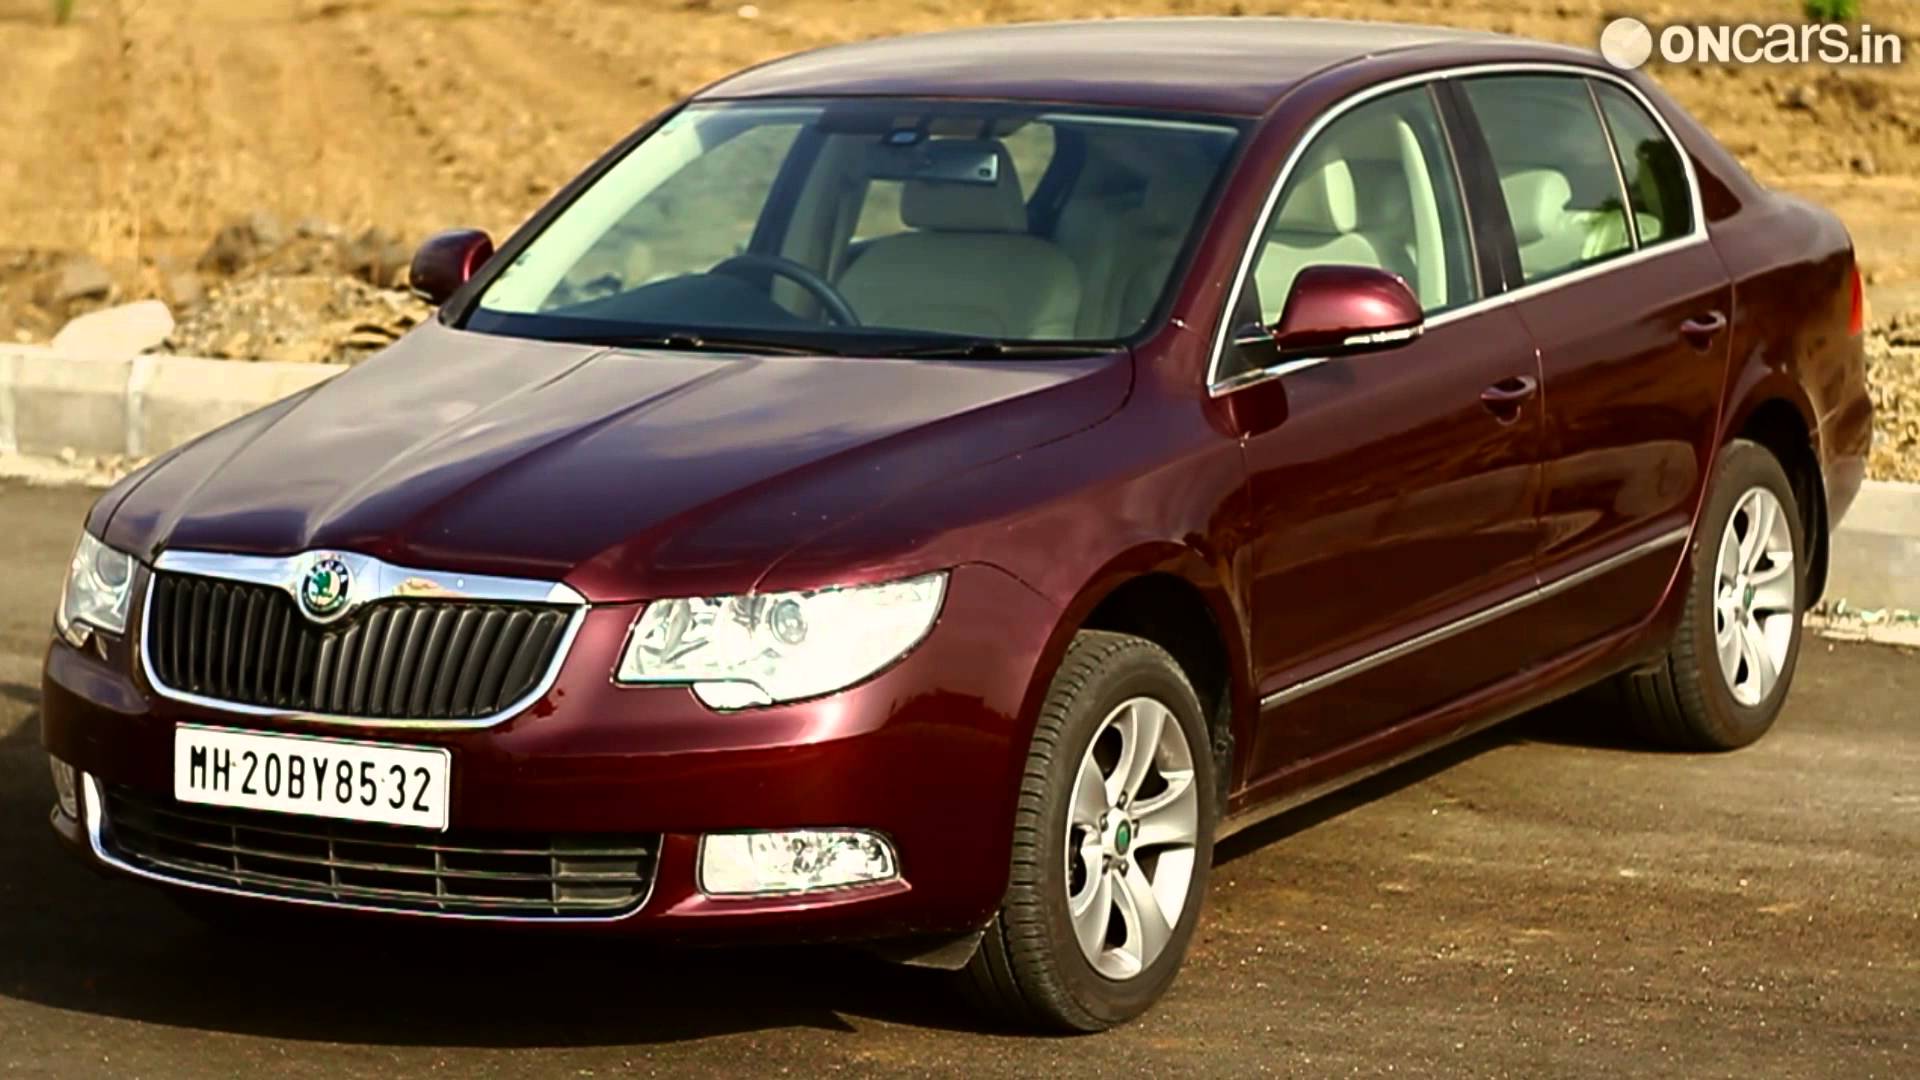 Volkswagen recalled Skoda Superb which marks the beggining of a very large-scale recall worldwide.